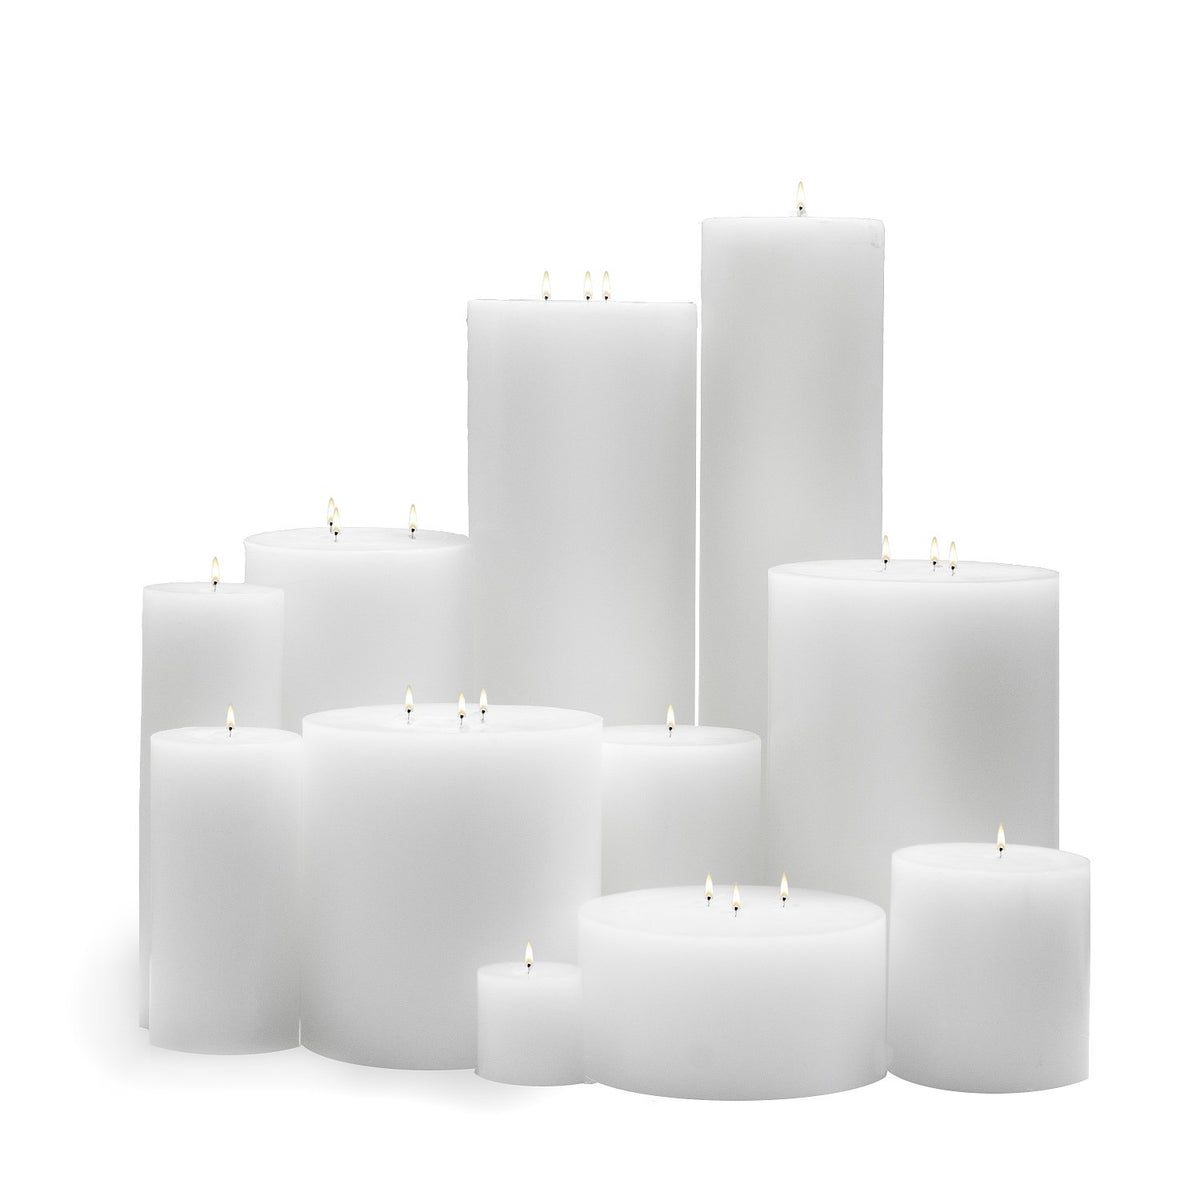 Richland Pillar Candles 3x6 White Set of 24 - Quick Candles